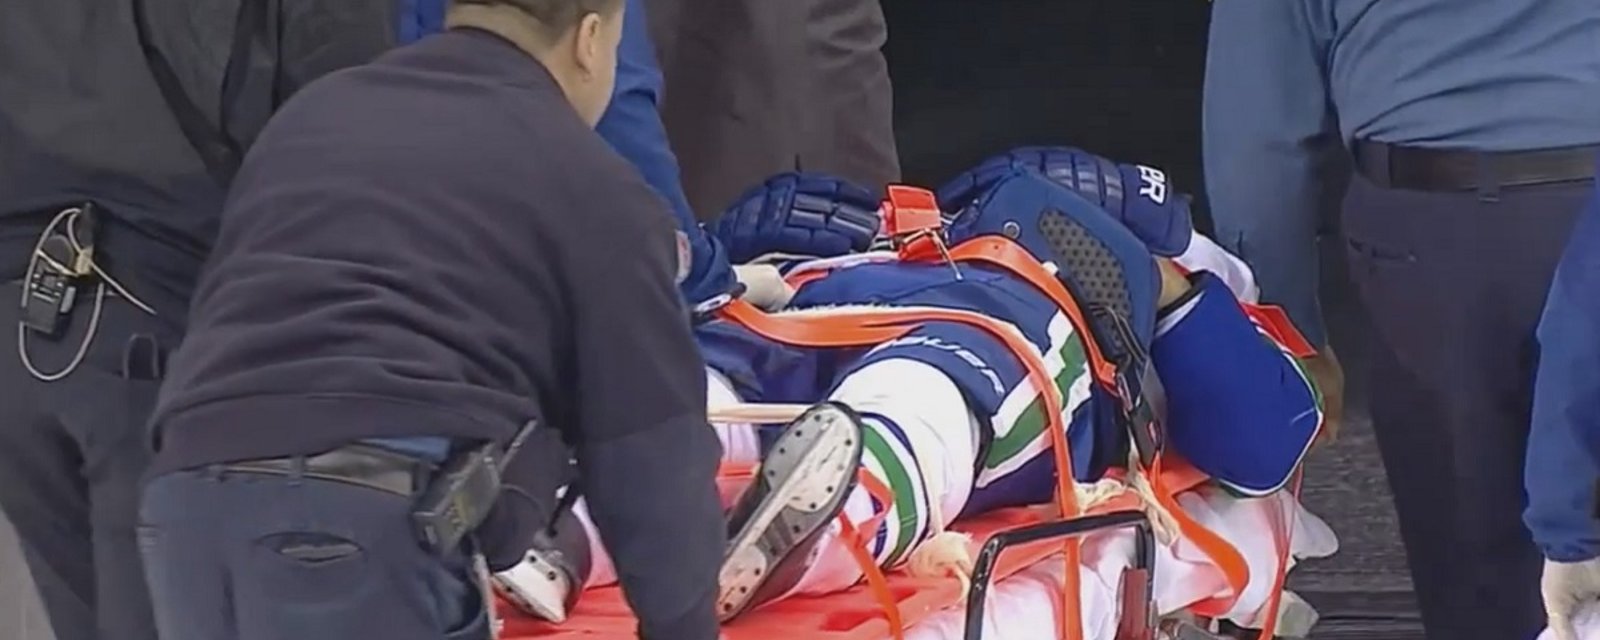 Update: Thunderous hit leads to player leaving the ice on a stretcher Tuesday night.